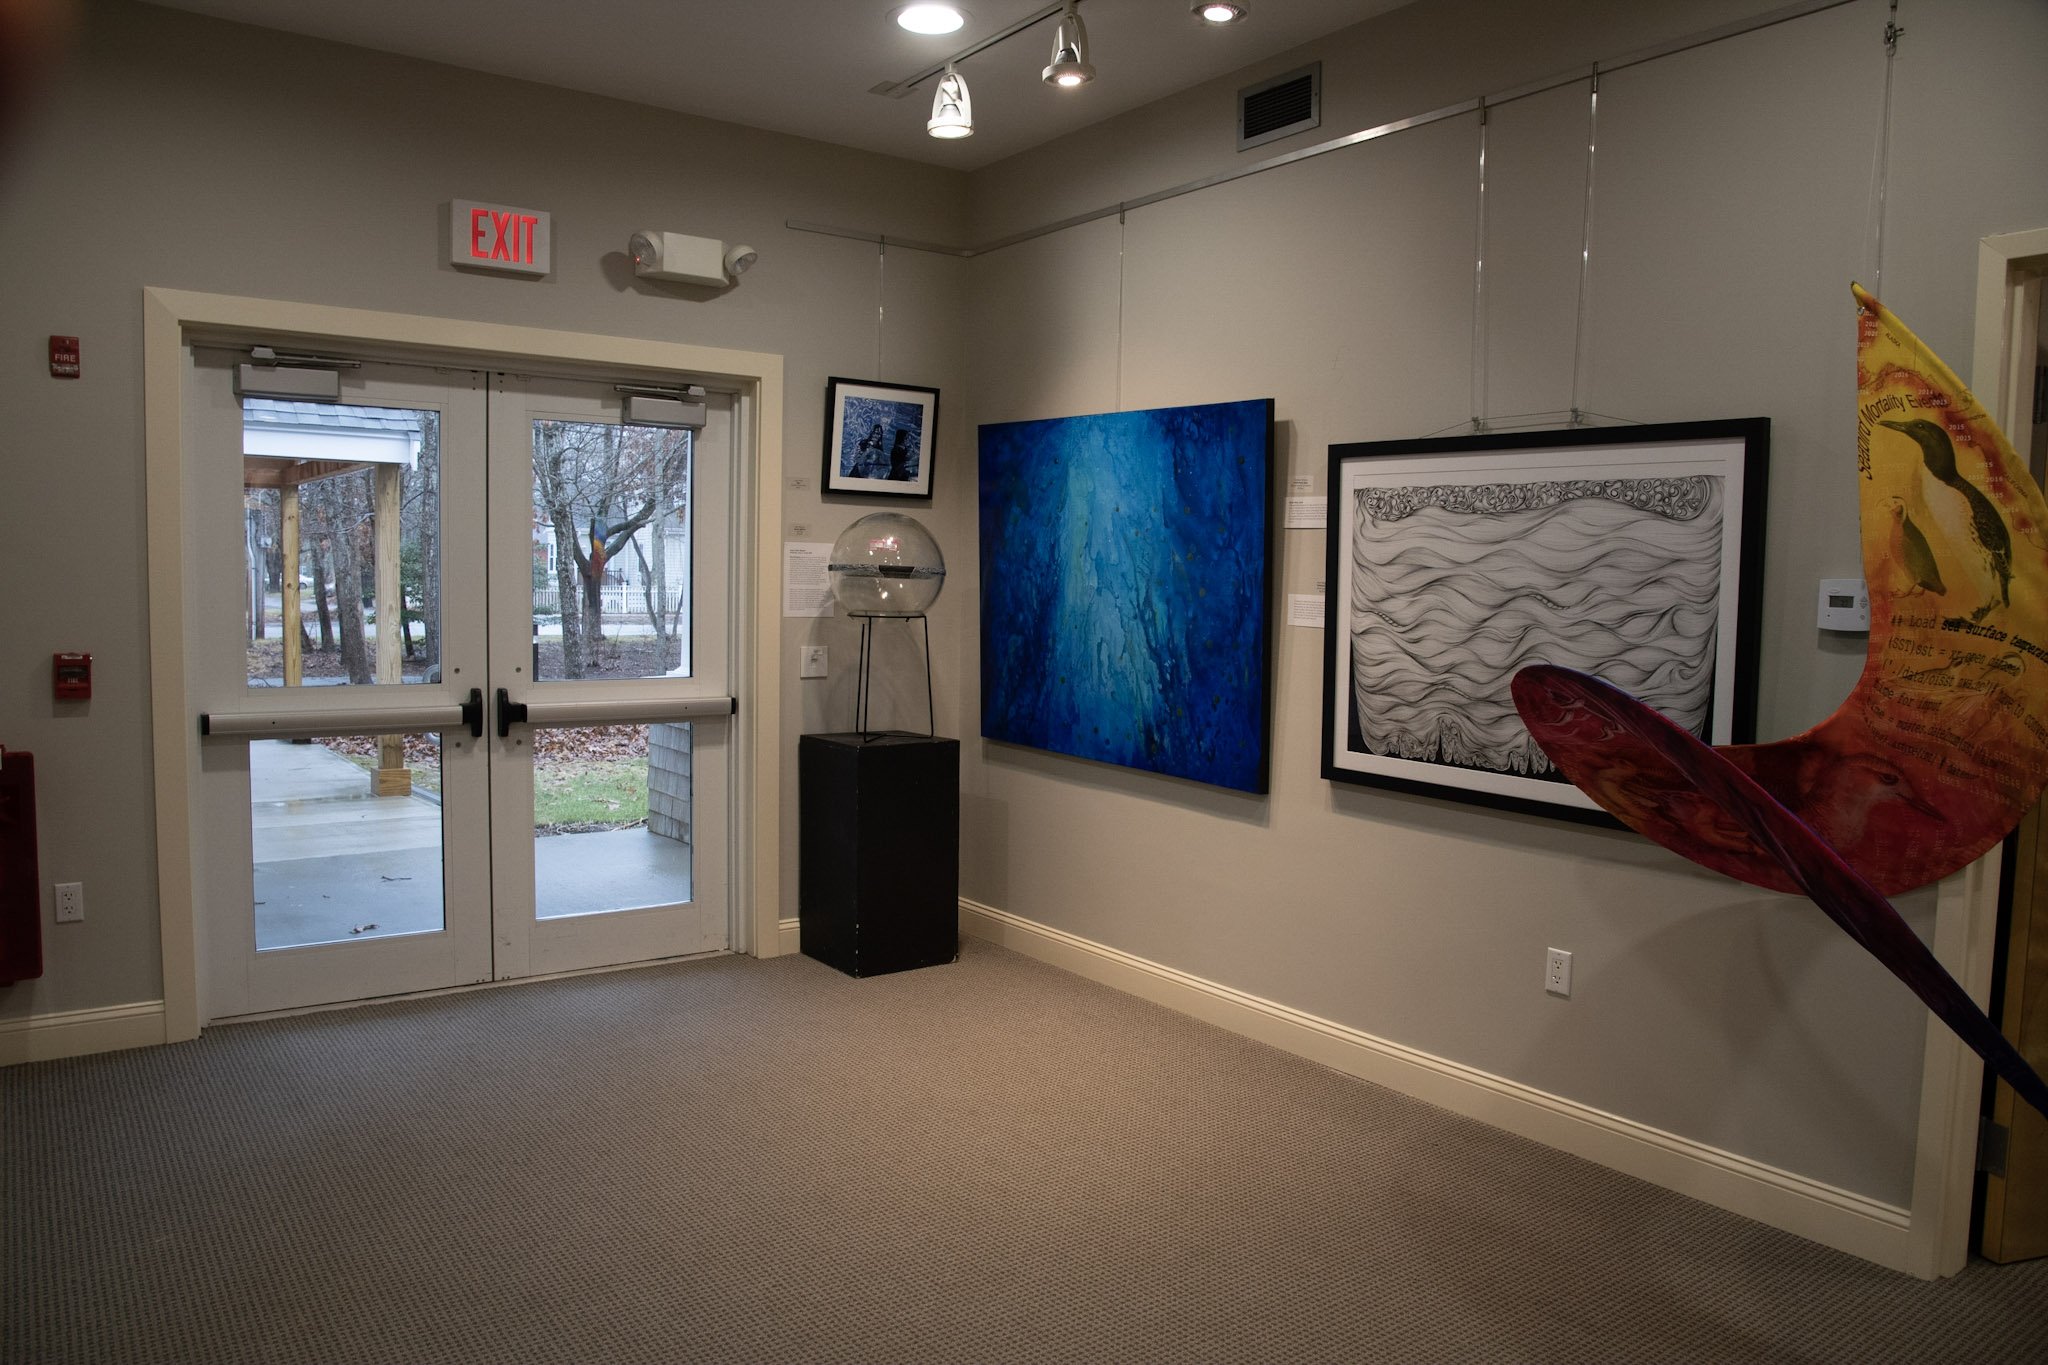  Several pieces of artwork hanging in the gallery, including "DCM: Party Zone" by Heather E. Stivison, "Turbulence" by Ellen Biegert, and "Marine Heatwaves" by Deb Ehrens 